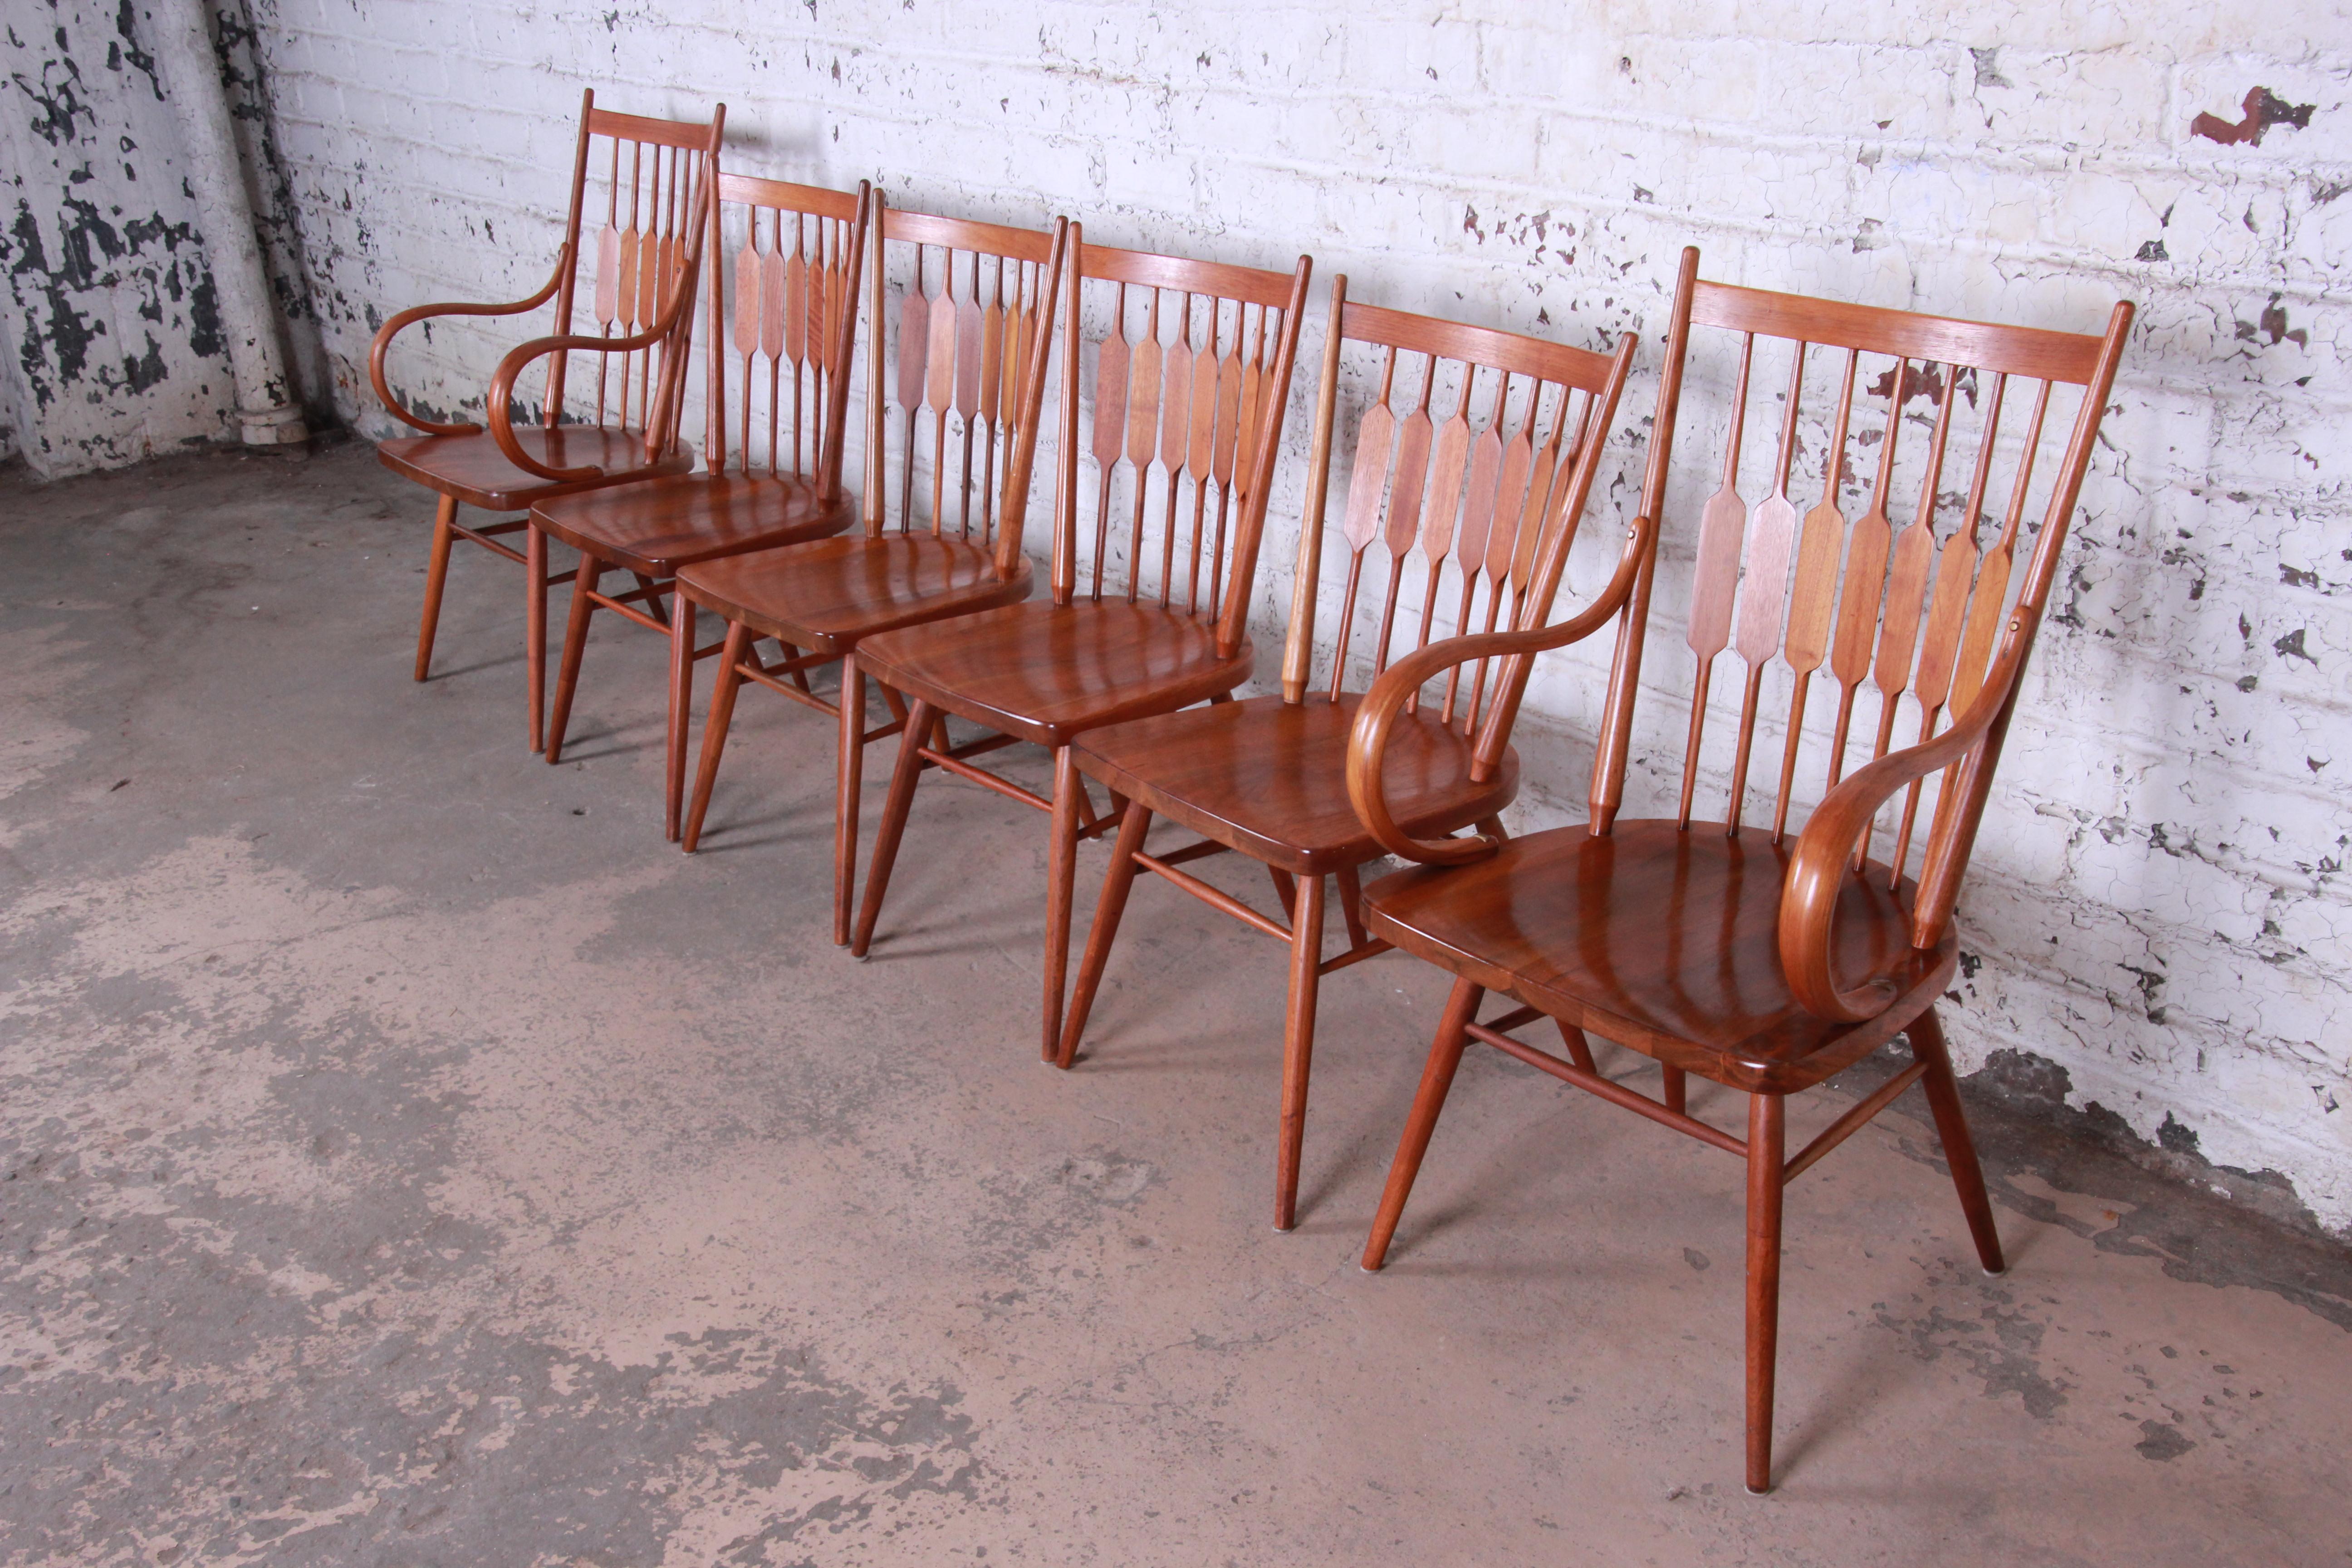 A rare and gorgeous set of six Mid-Century Modern sculpted walnut dining chairs designed by Kipp Stewart for his Declaration line for Drexel. The set includes two captain armchairs and four side chairs. The chairs are a modern take on the Windsor